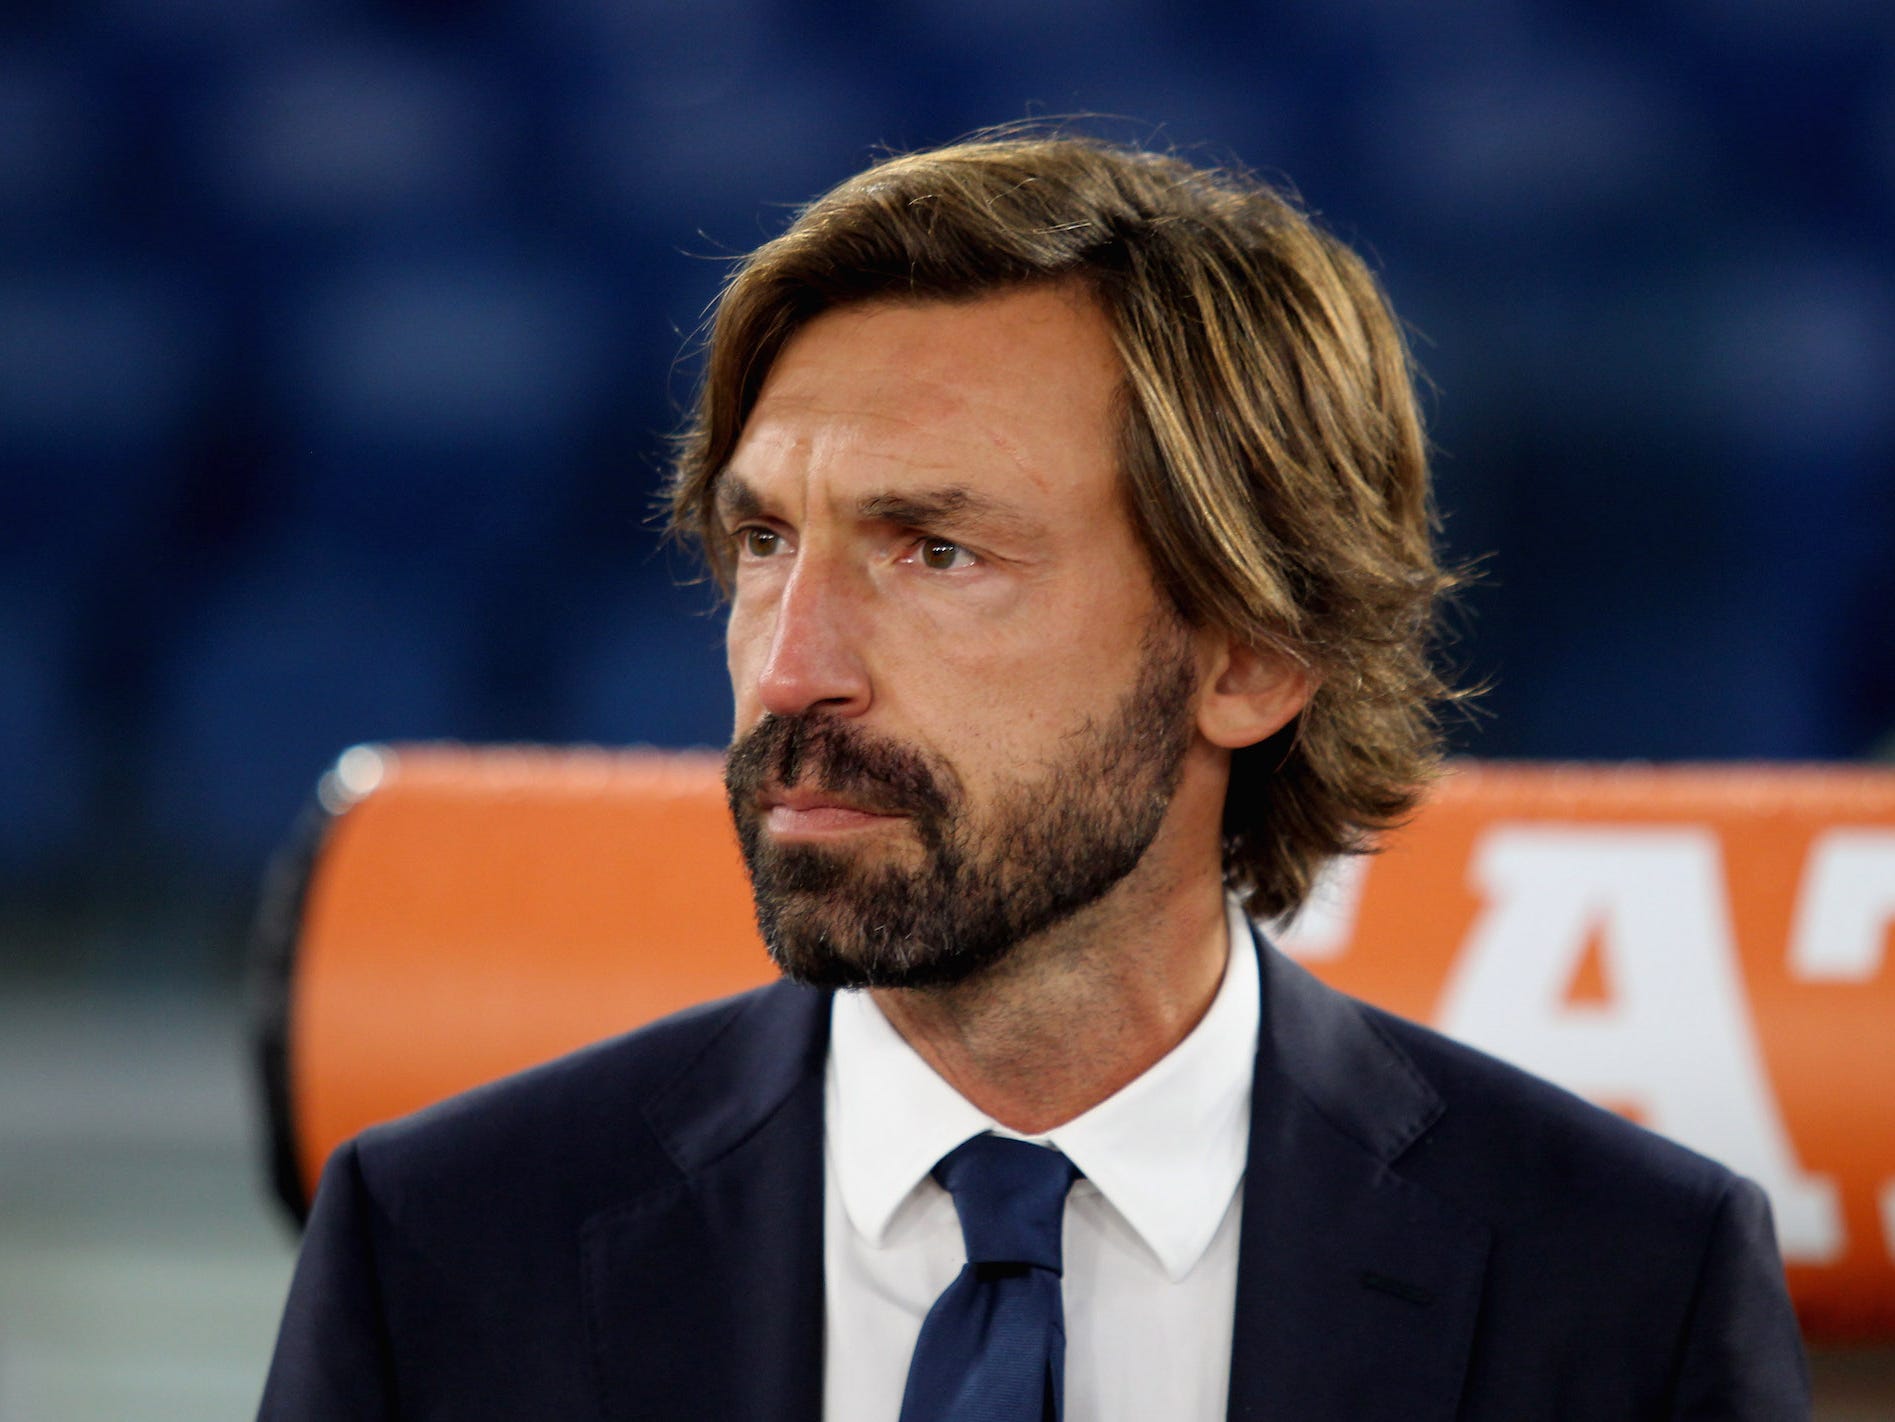 Juventus head coach Andrea Pirlo looks on during the Serie A match between AS Roma and Juventus at Stadio Olimpico